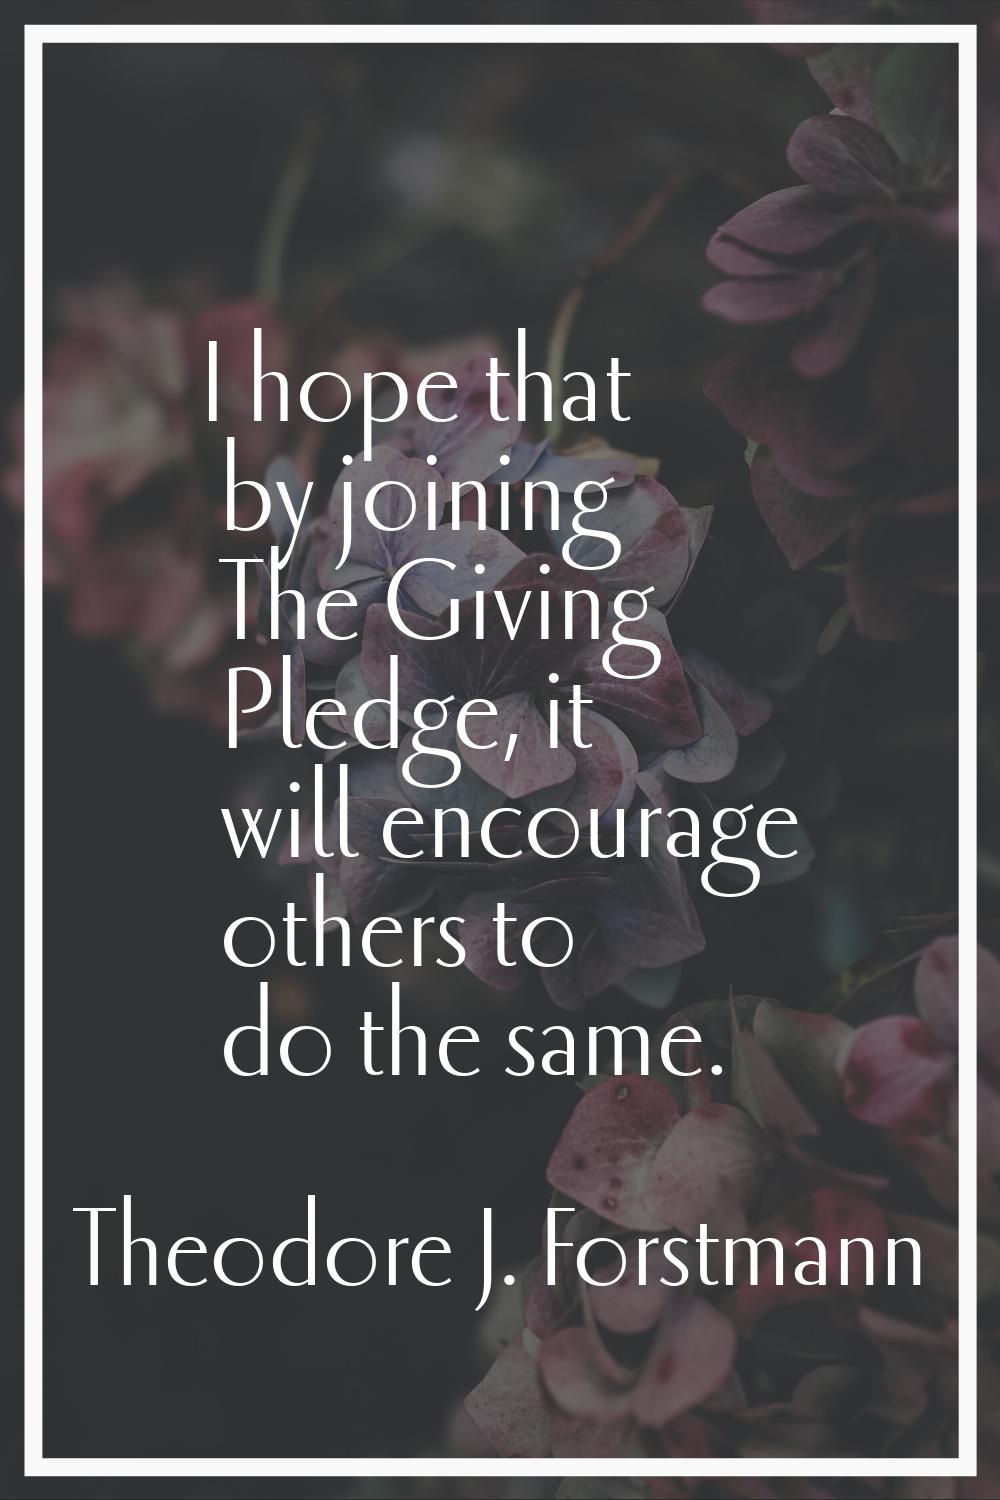 I hope that by joining The Giving Pledge, it will encourage others to do the same.